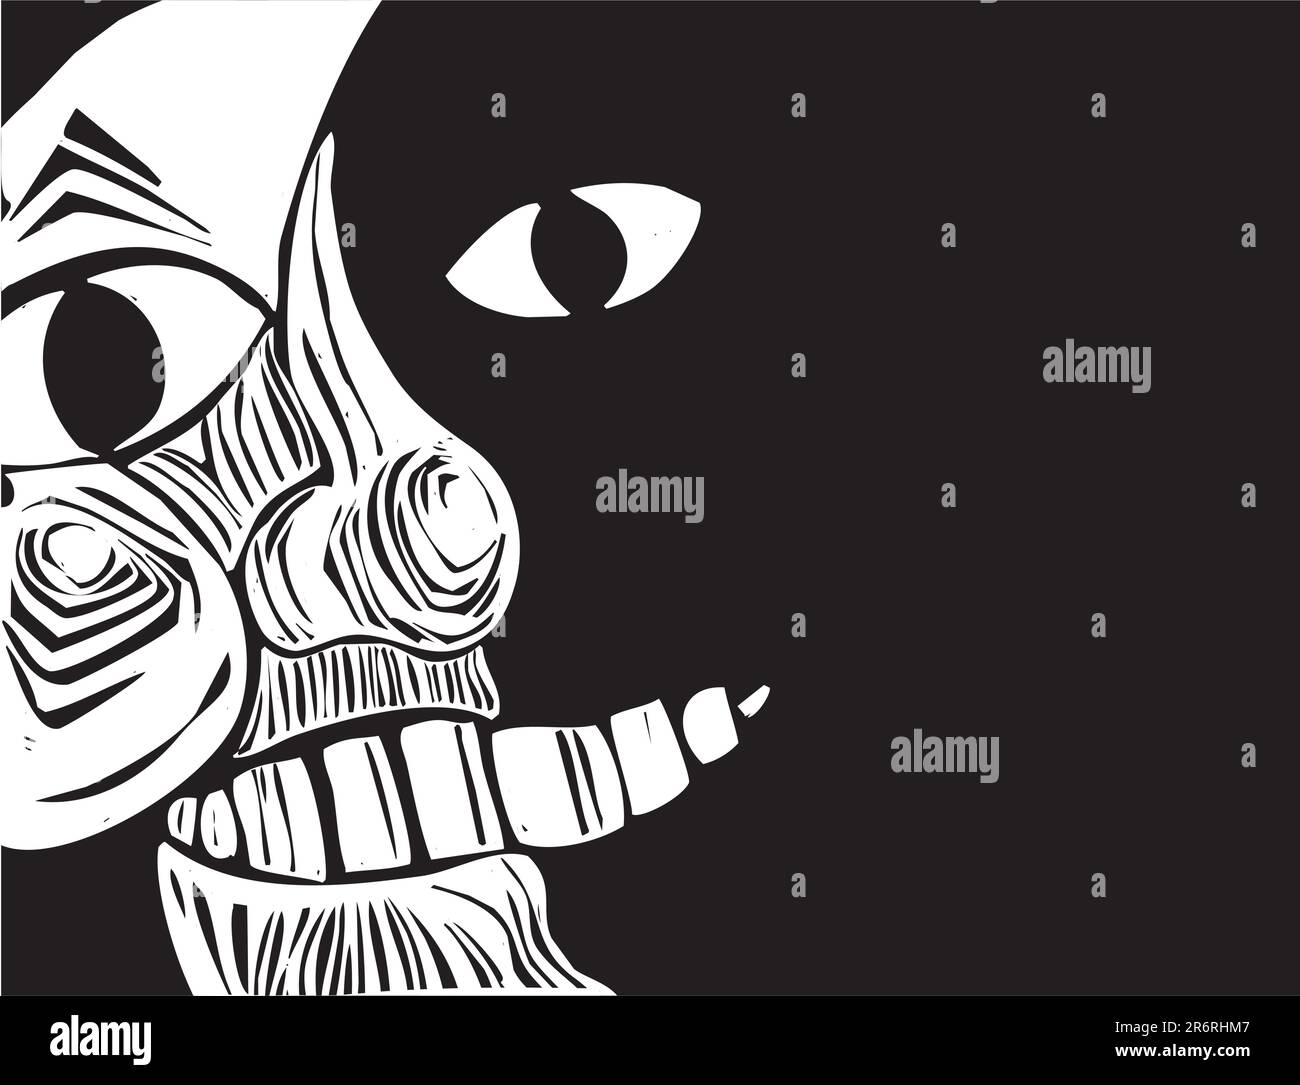 Closeup image of the man in the moon derived from one of my woodcuts. Plenty of space on the right hand side of the image for text. Stock Vector